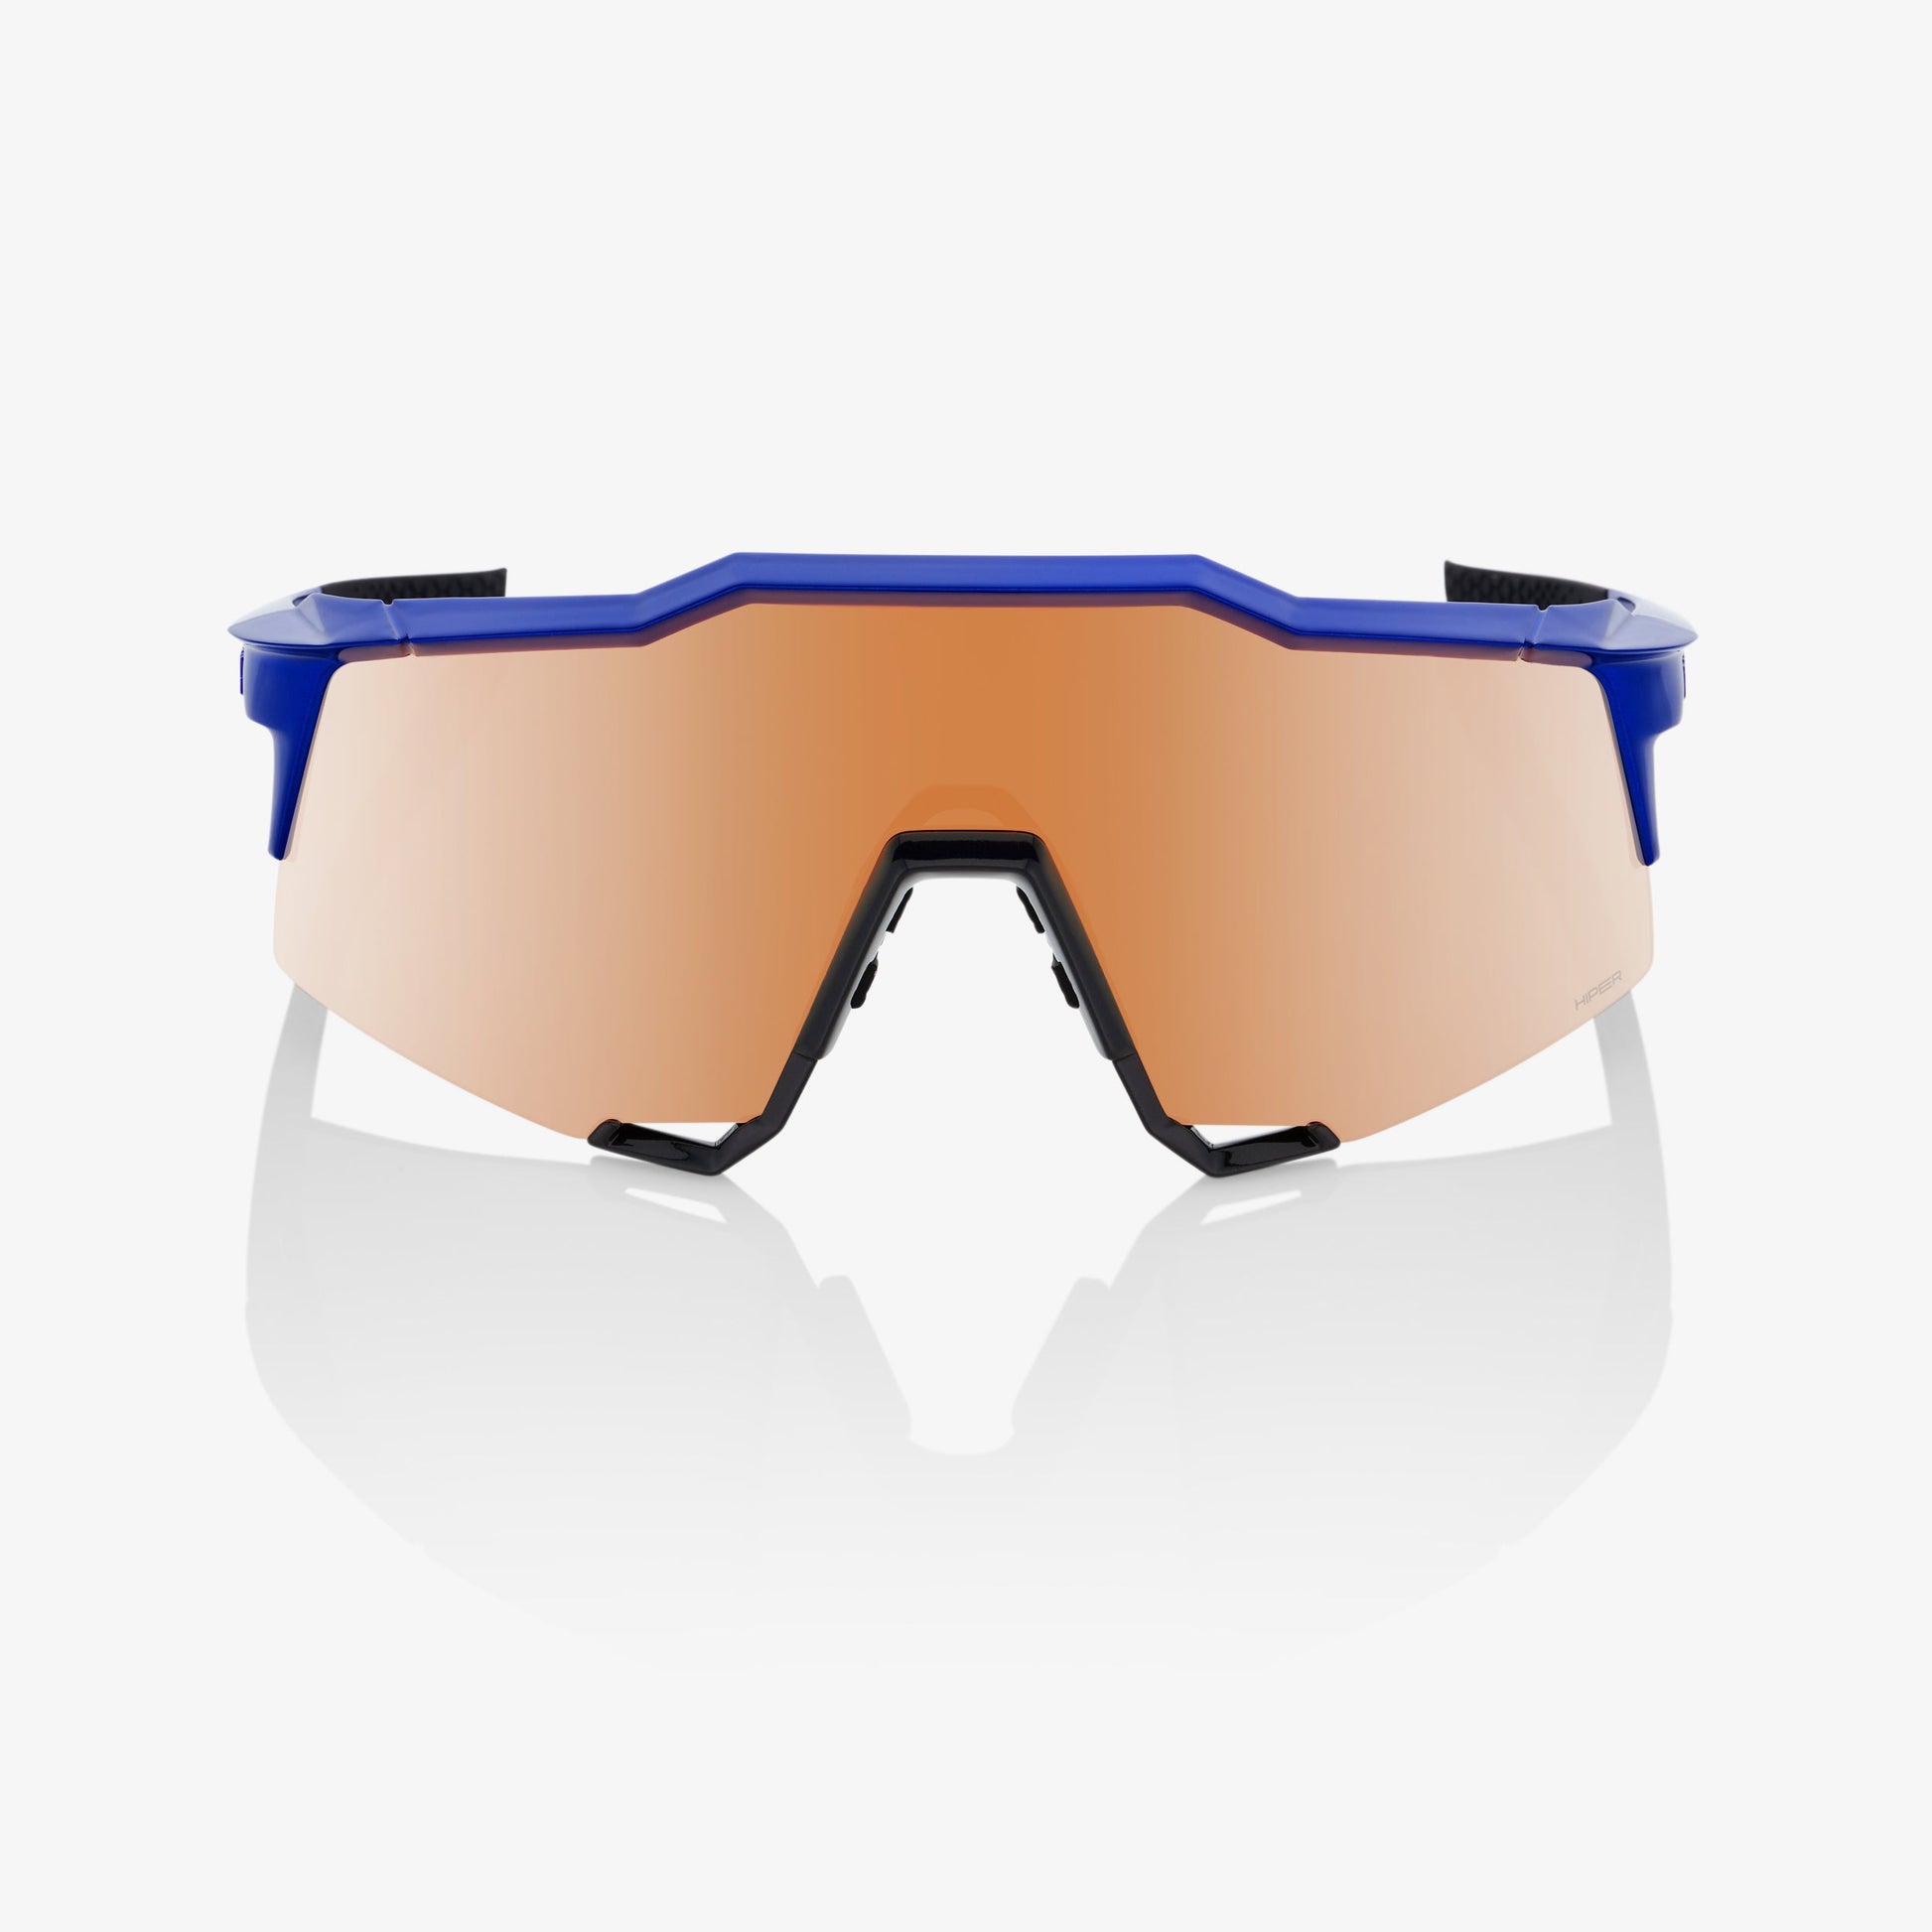 Cobalt Water Beads Polycarbonate Glasses